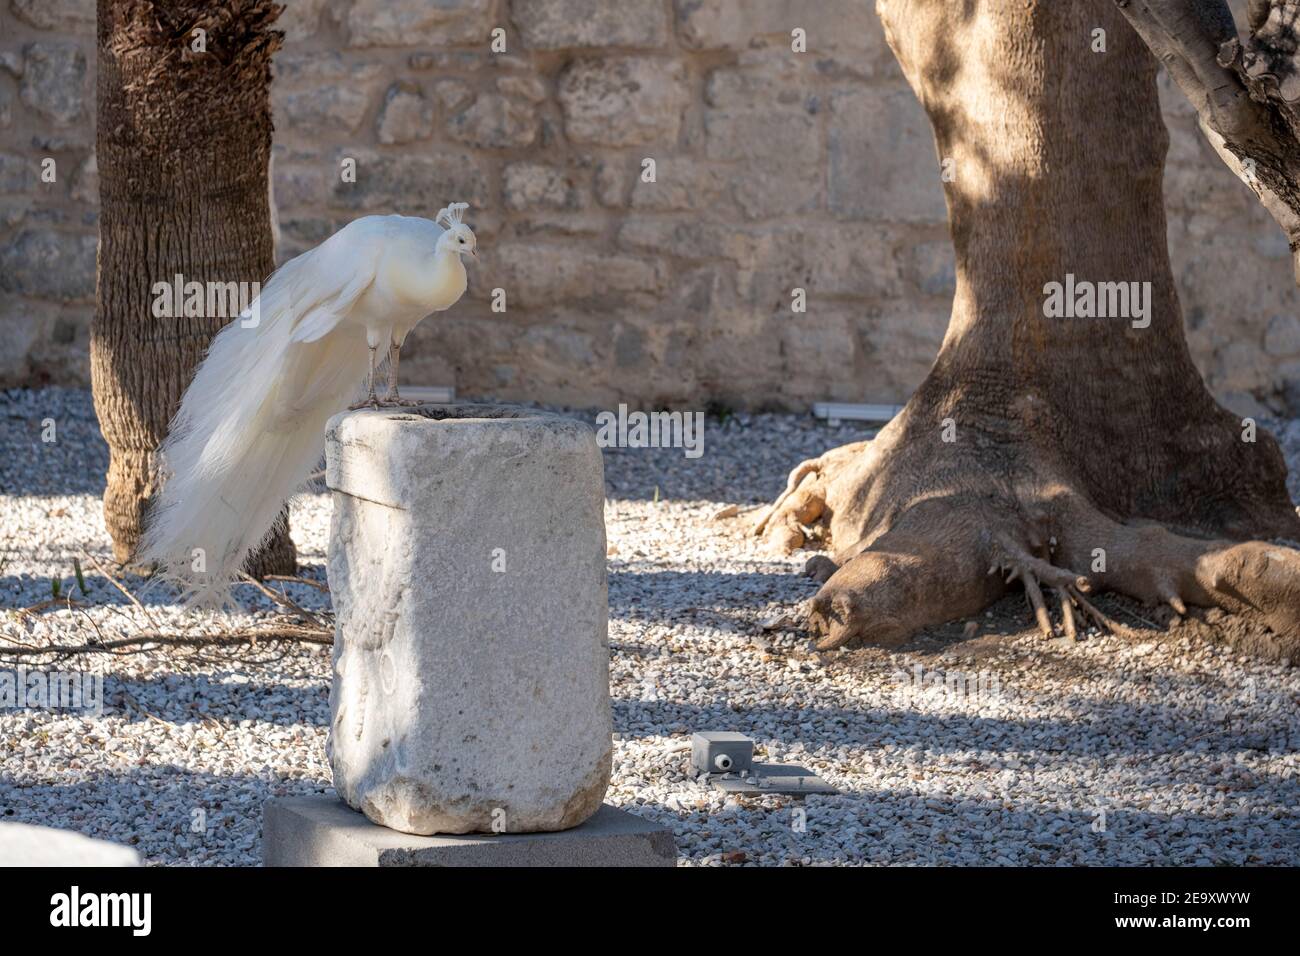 Rare animal concept: A white peacock standing on an ancient pedestal in an outdoor museum garden. The bird has a beautiful crown and long feathers. Stock Photo